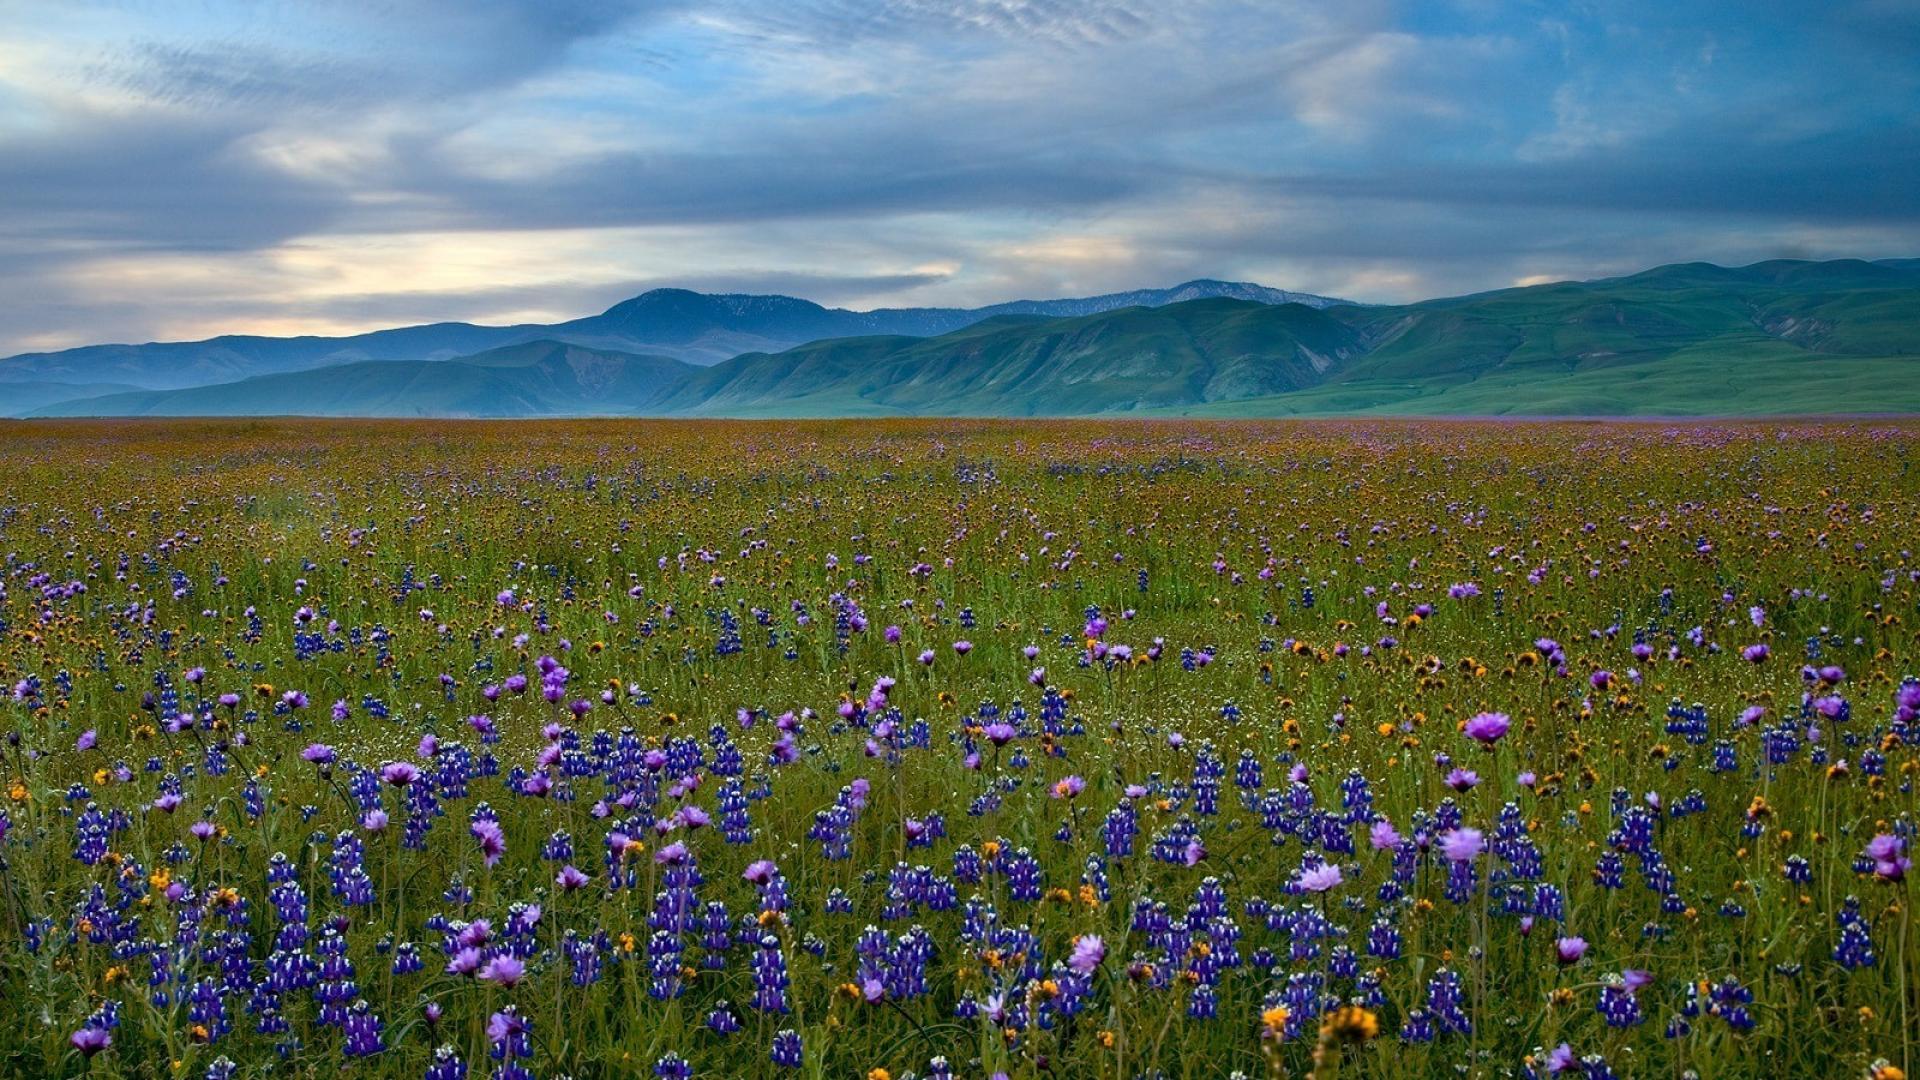 Mountains landscapes nature california meadows blue flowers